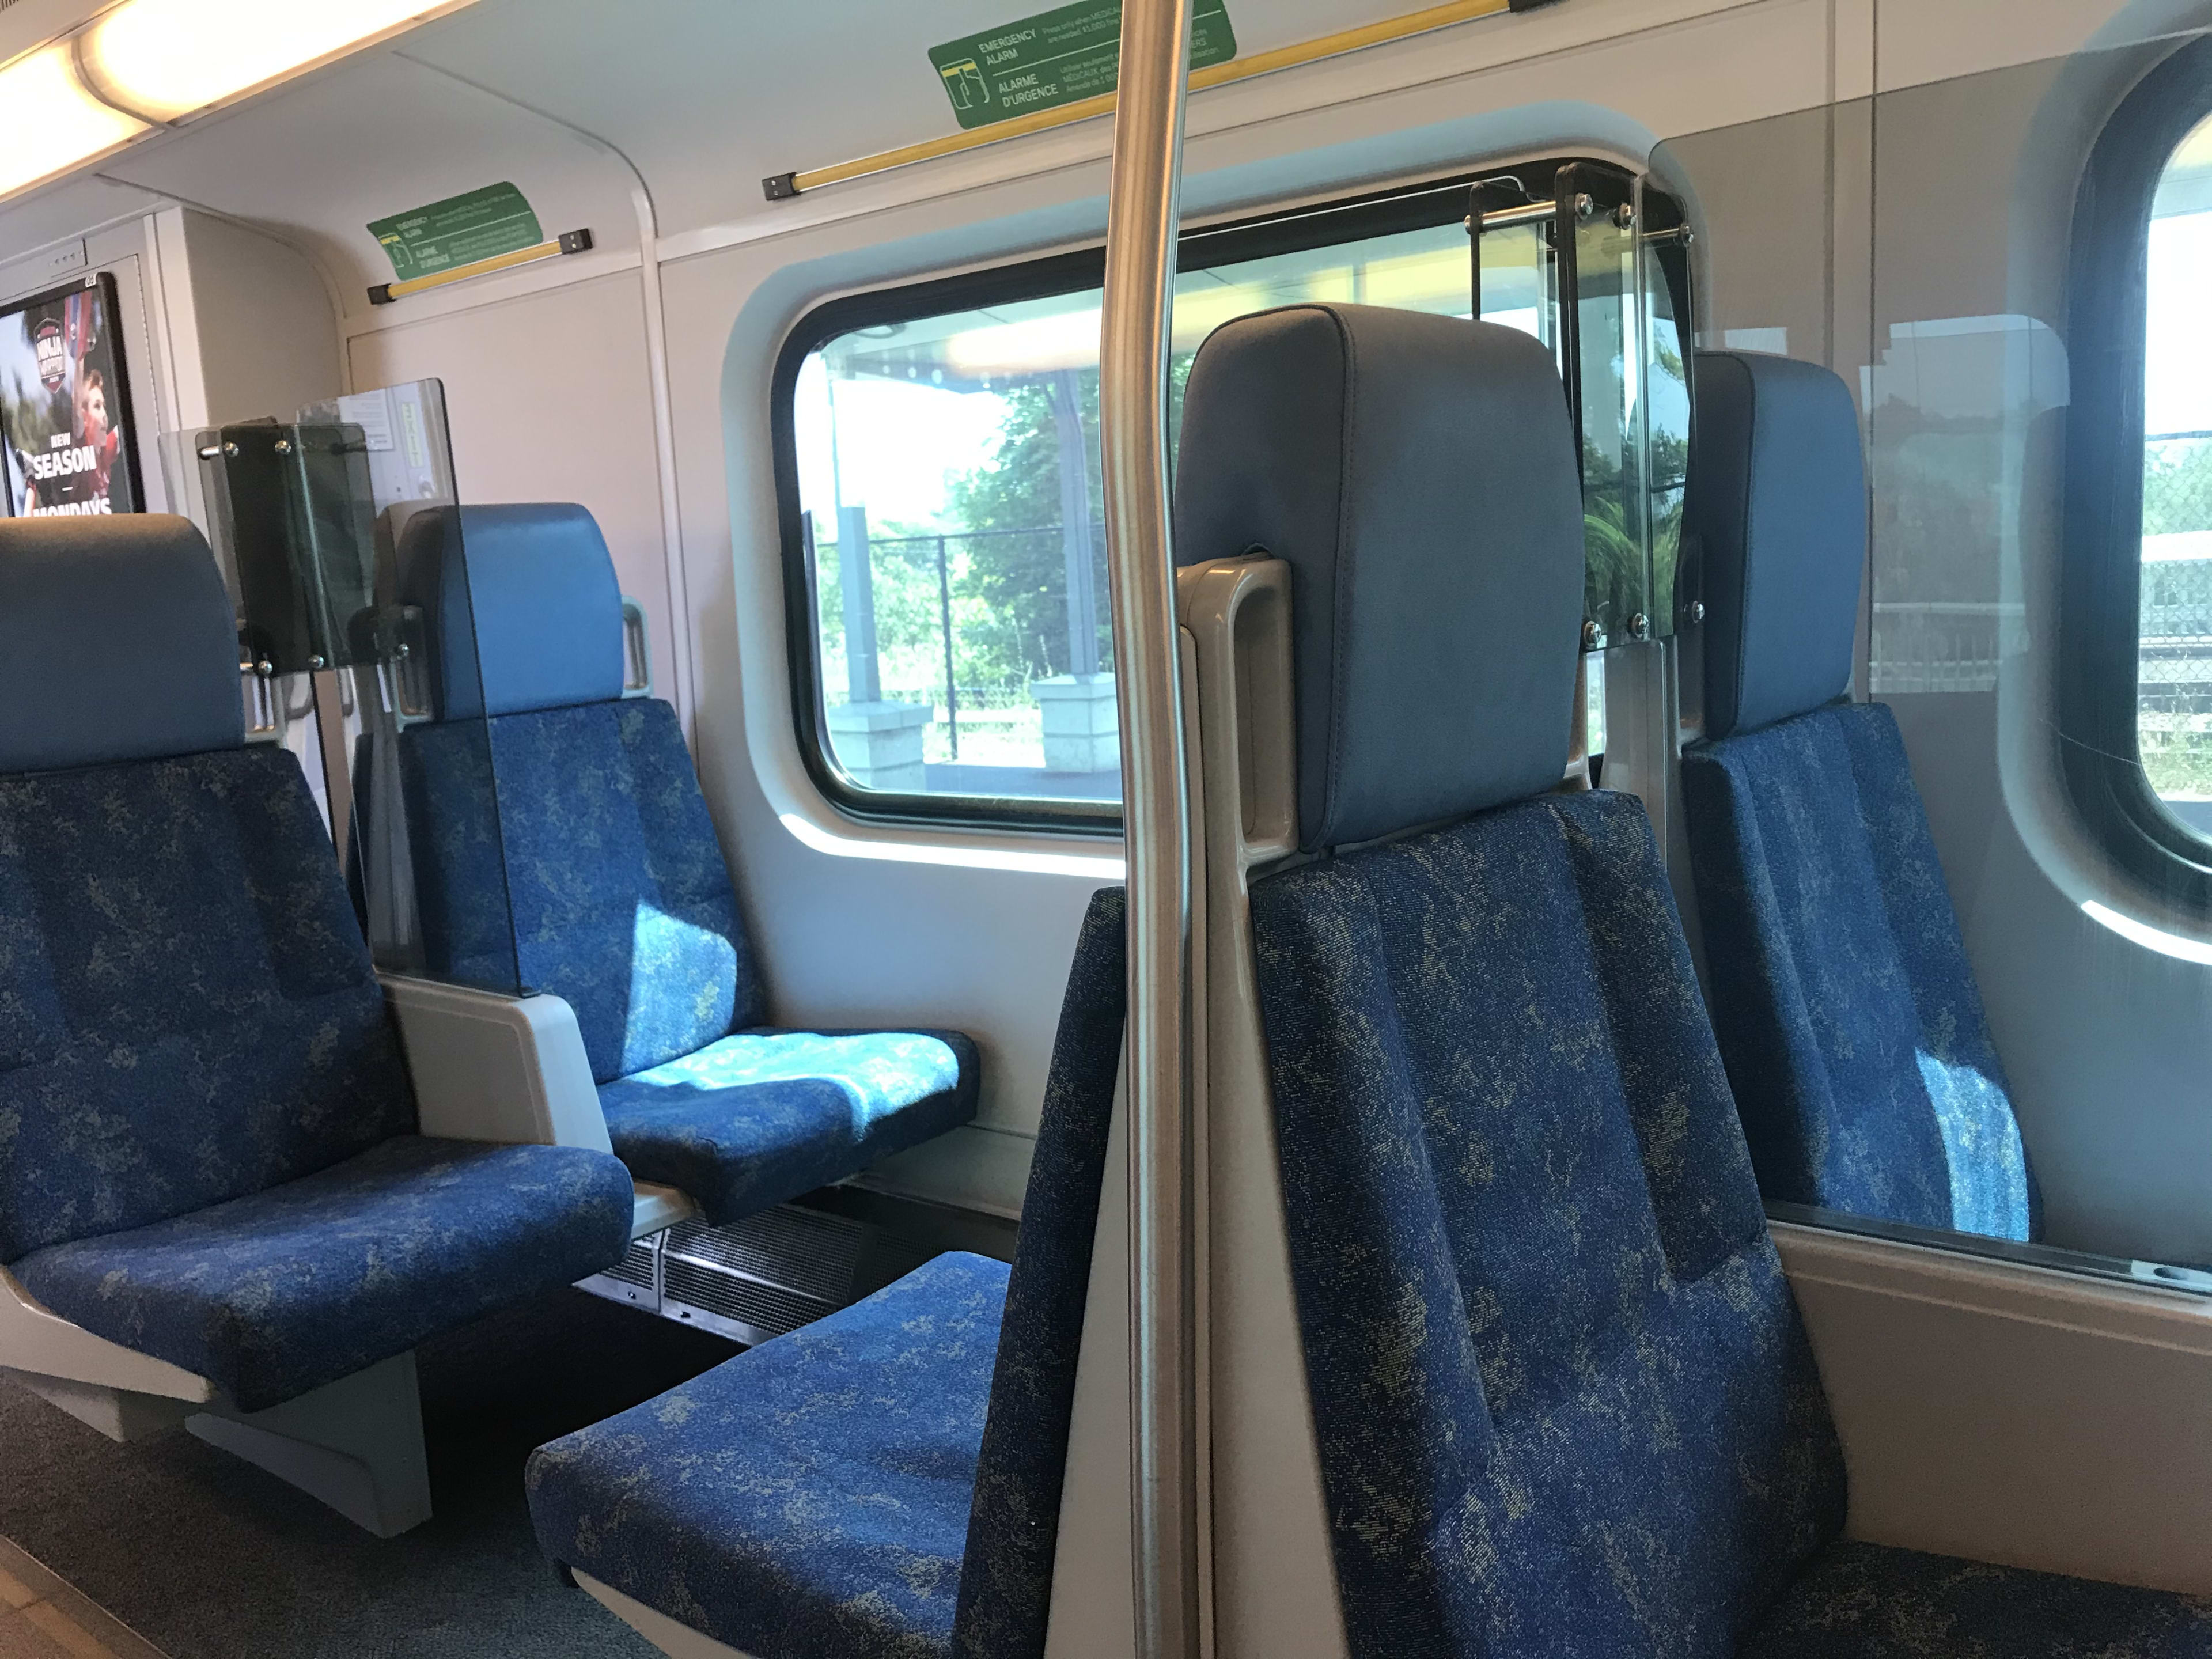 new clear plastic dividers between seats on GO Train are being rolled out on some GO Trains